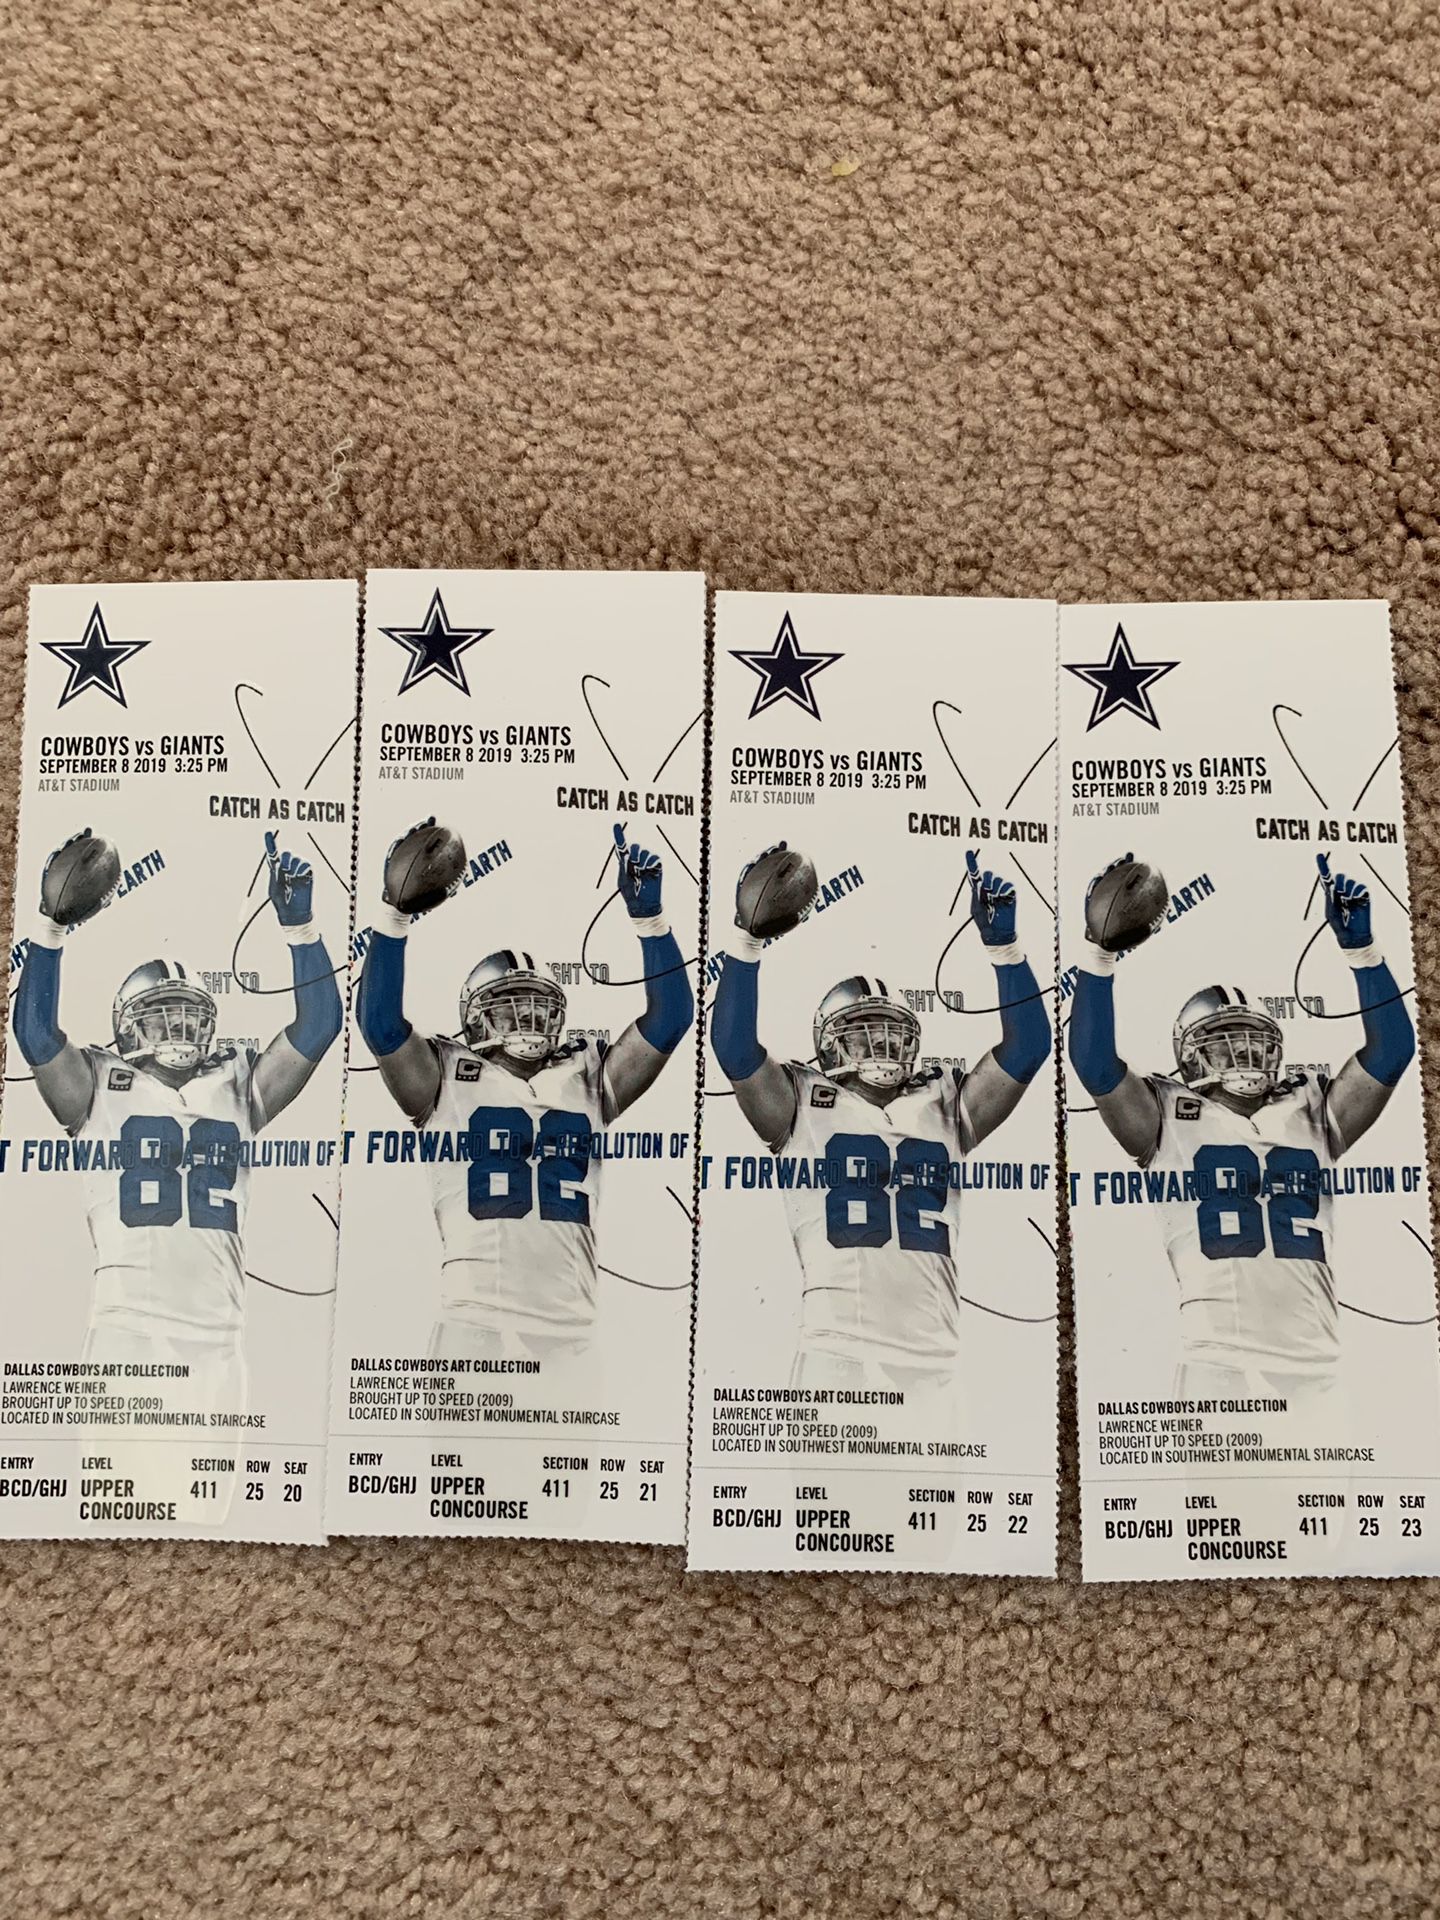 Up to 20 Good New York NY Giants @ Dallas Cowboys Tickets & Parking